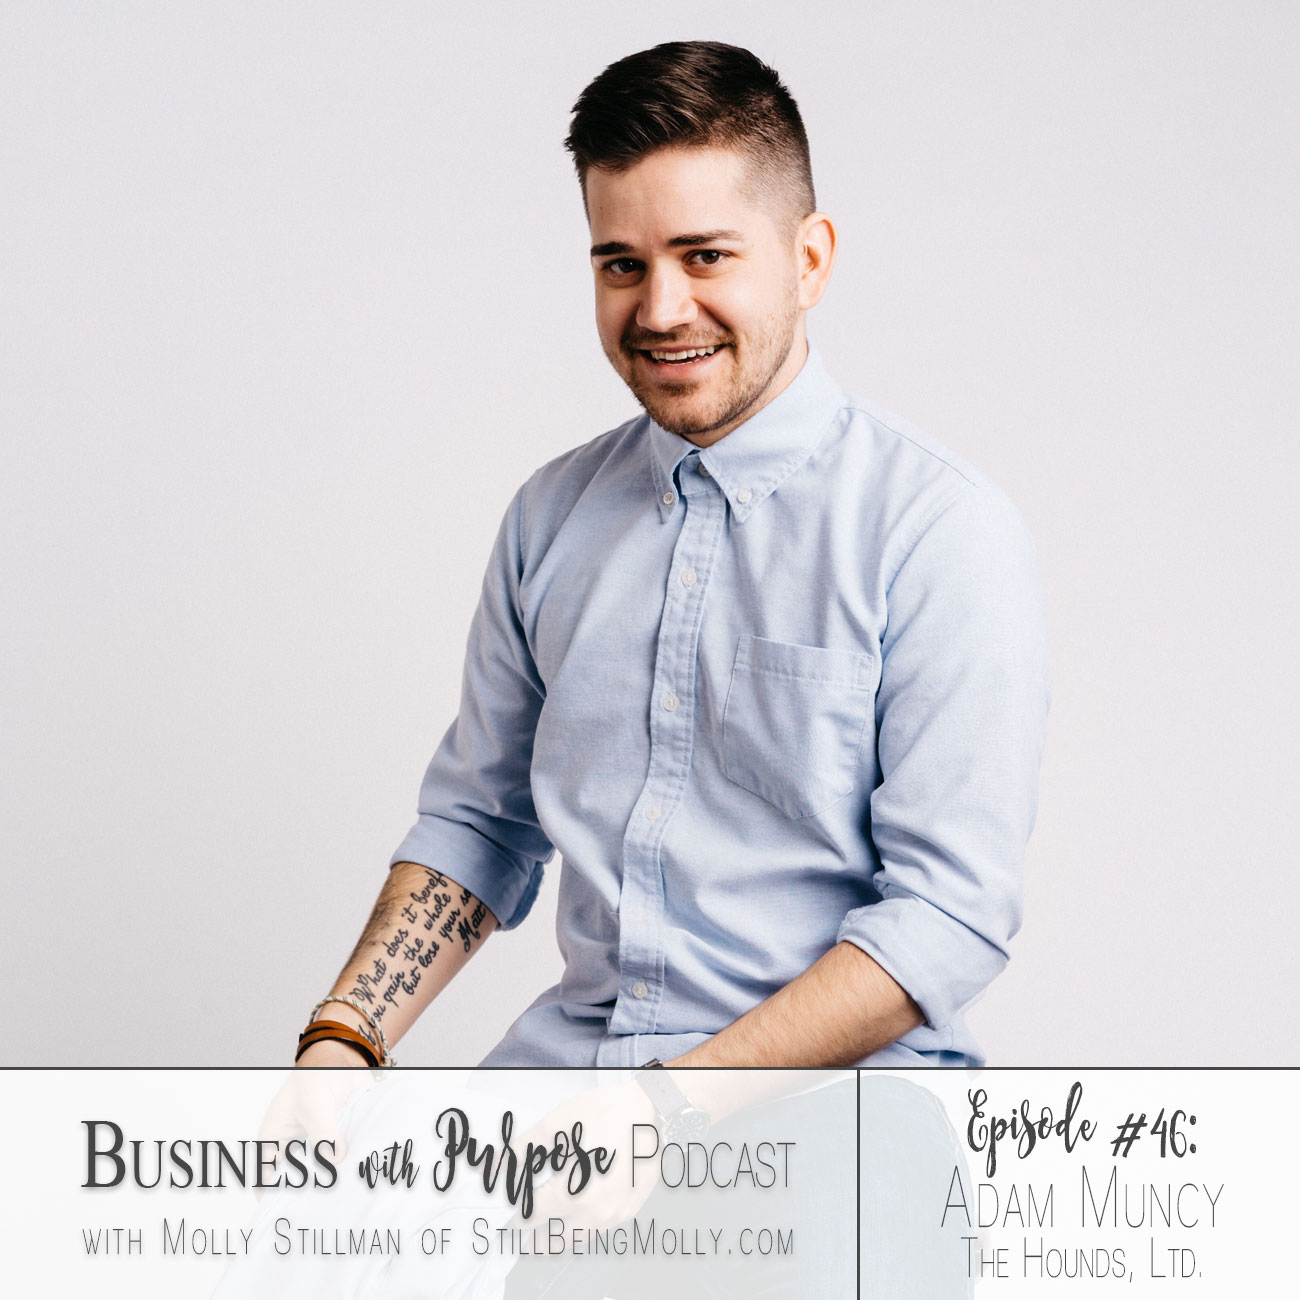 EP 46: Adam Muncy, Founder of The Hounds, Ltd. on social entrepreneurship, impacting our inner cities, and making a real, lasting difference